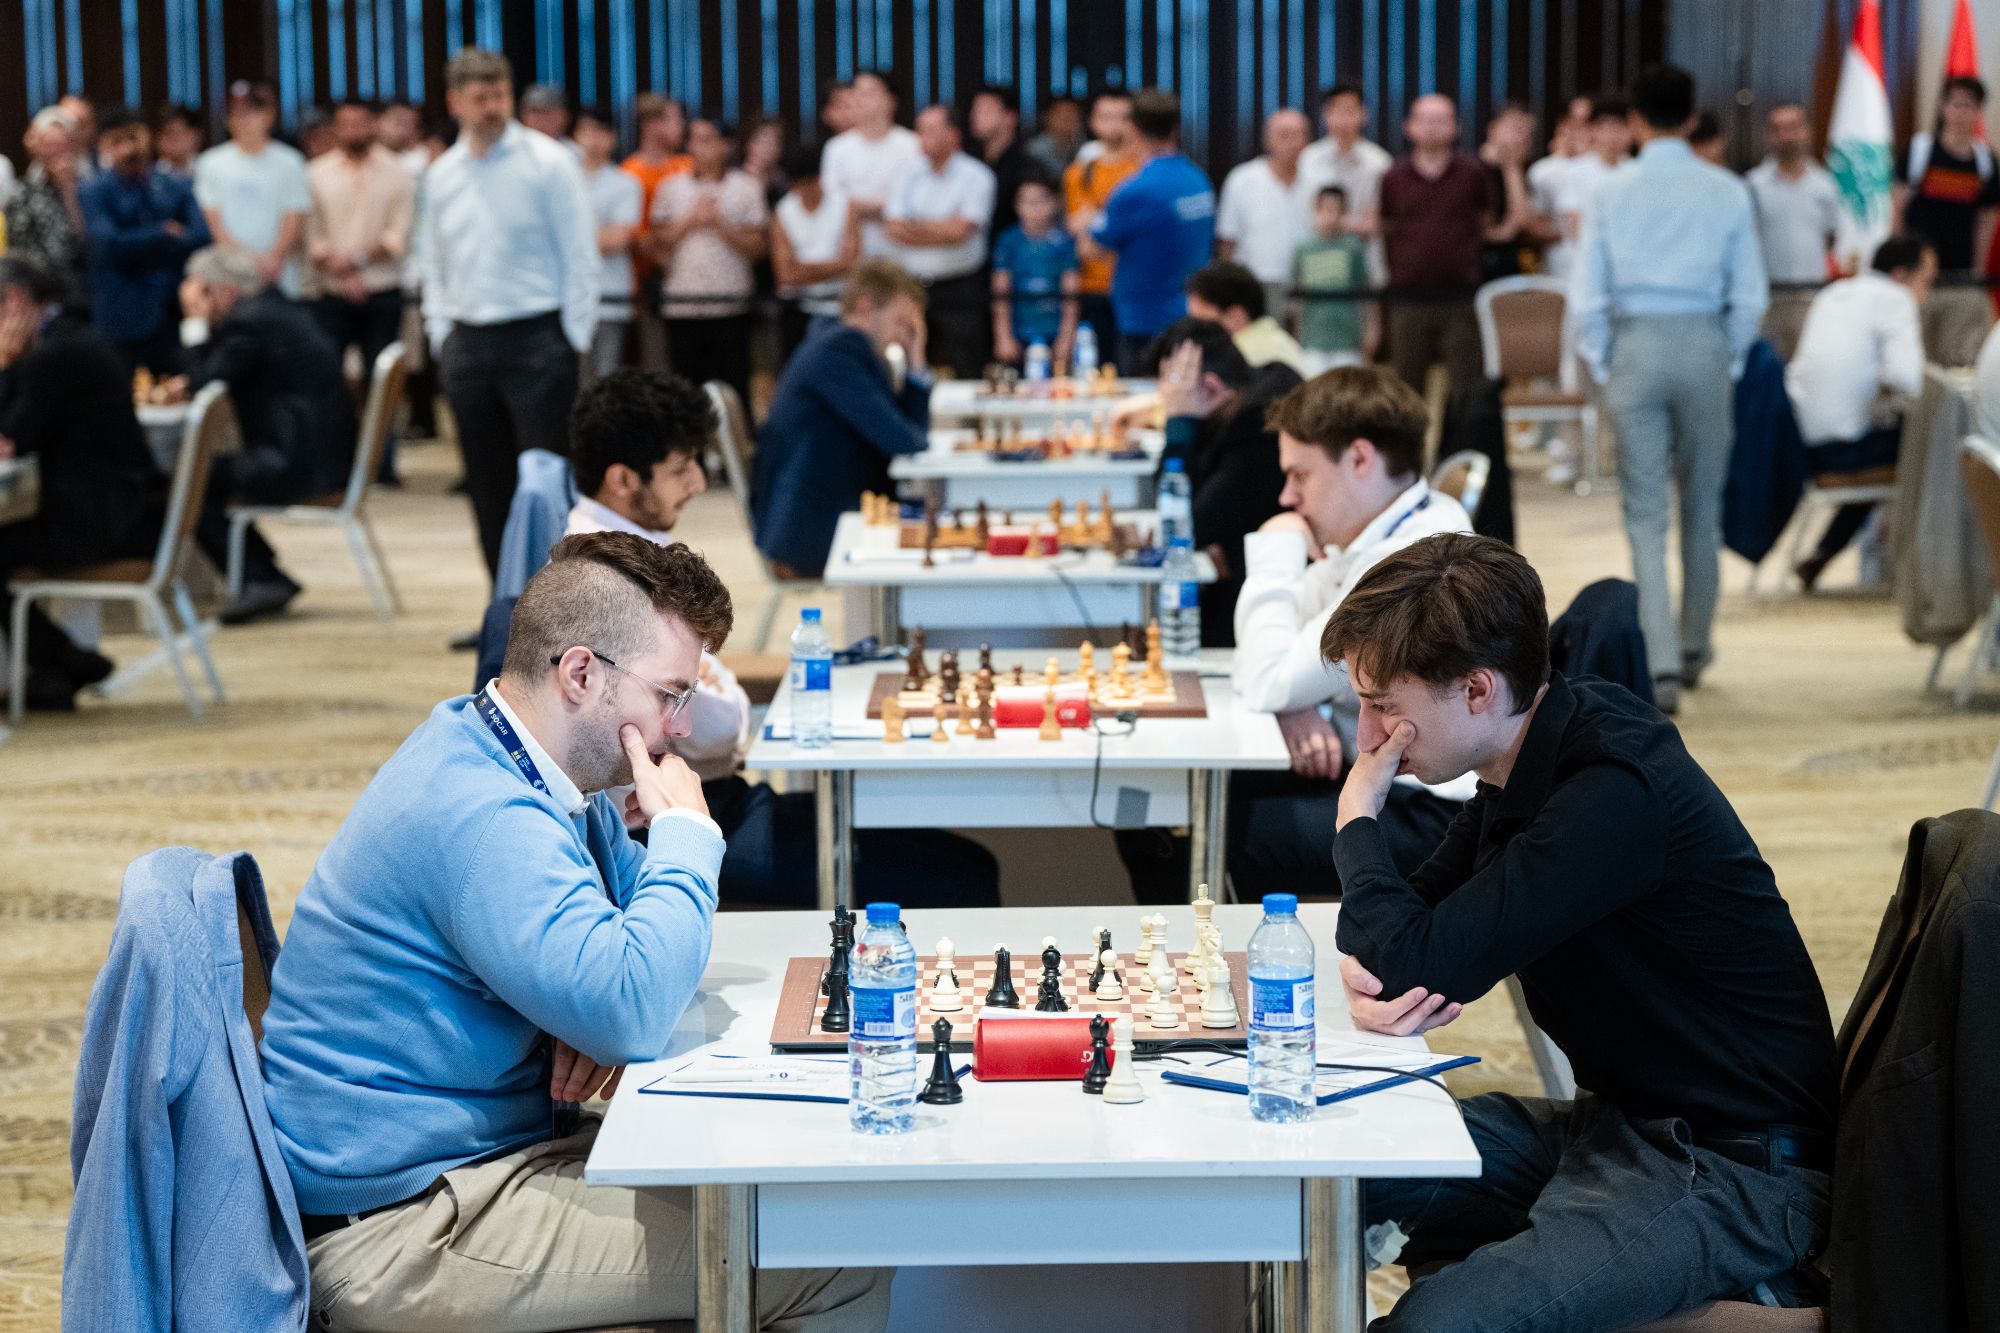 Vocaturo and Dubov in front of other games and spectators